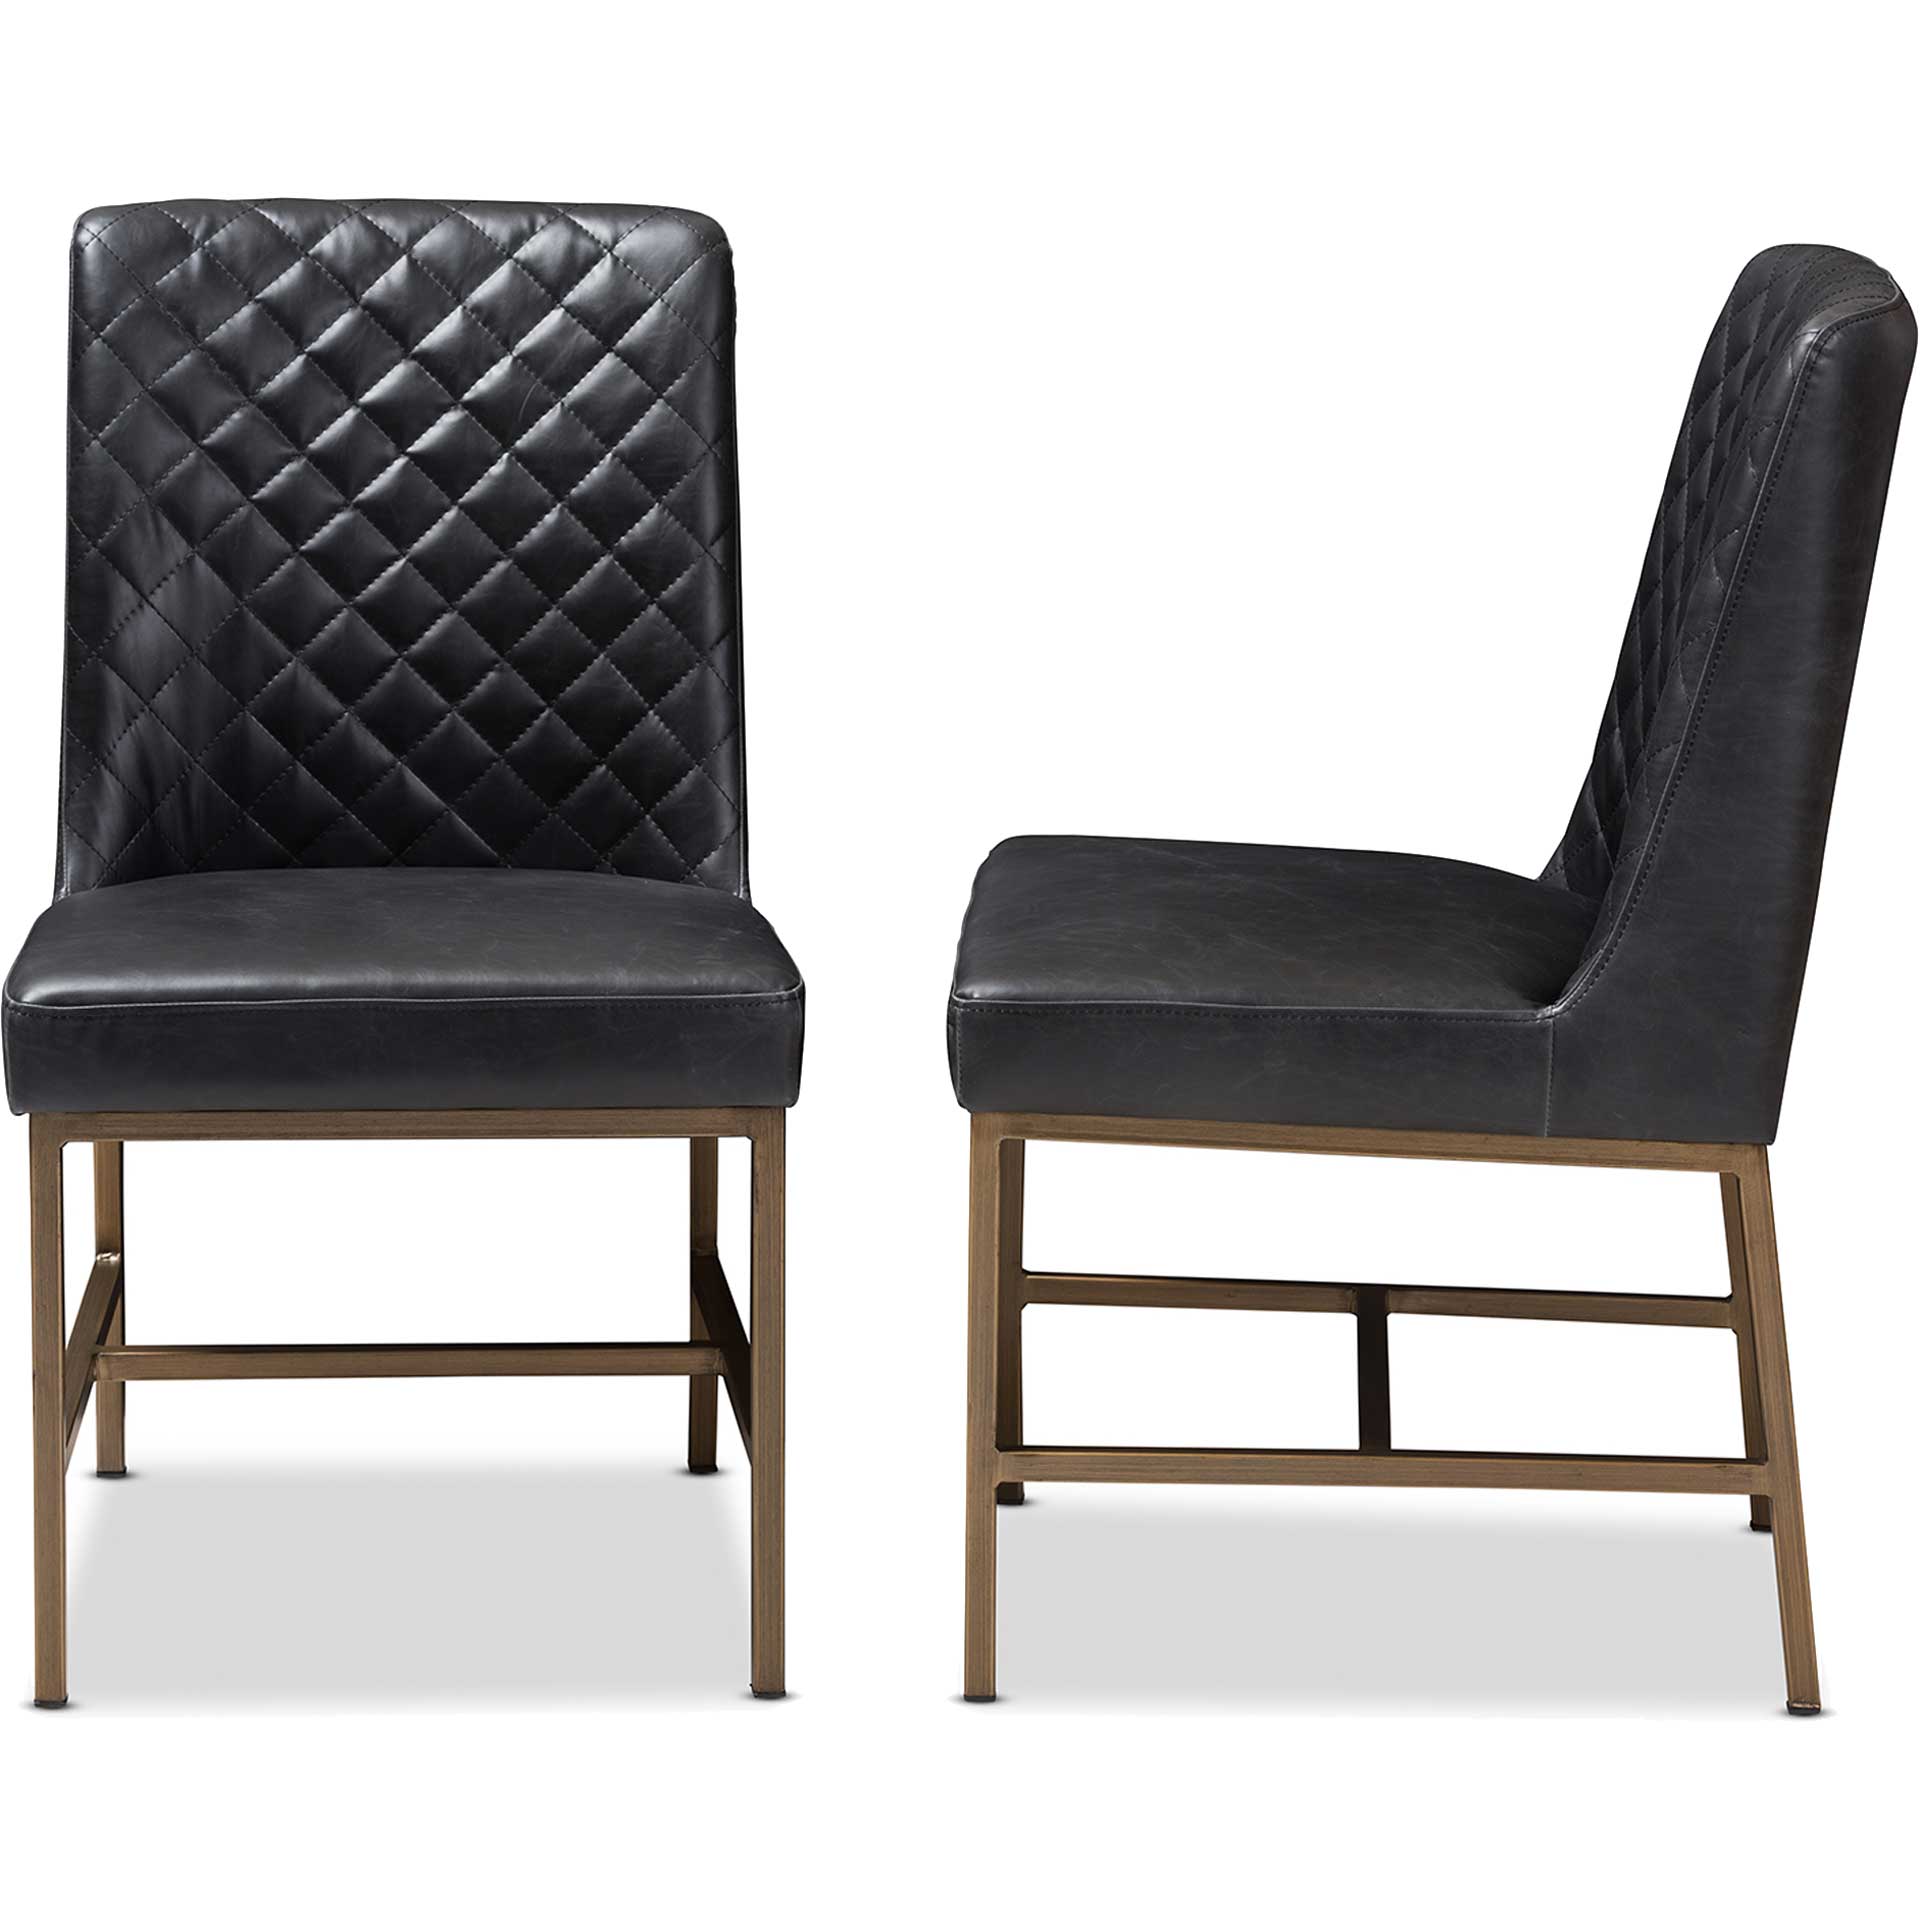 Mabelle Faux Leather Dining Chair Black (Set of 2)